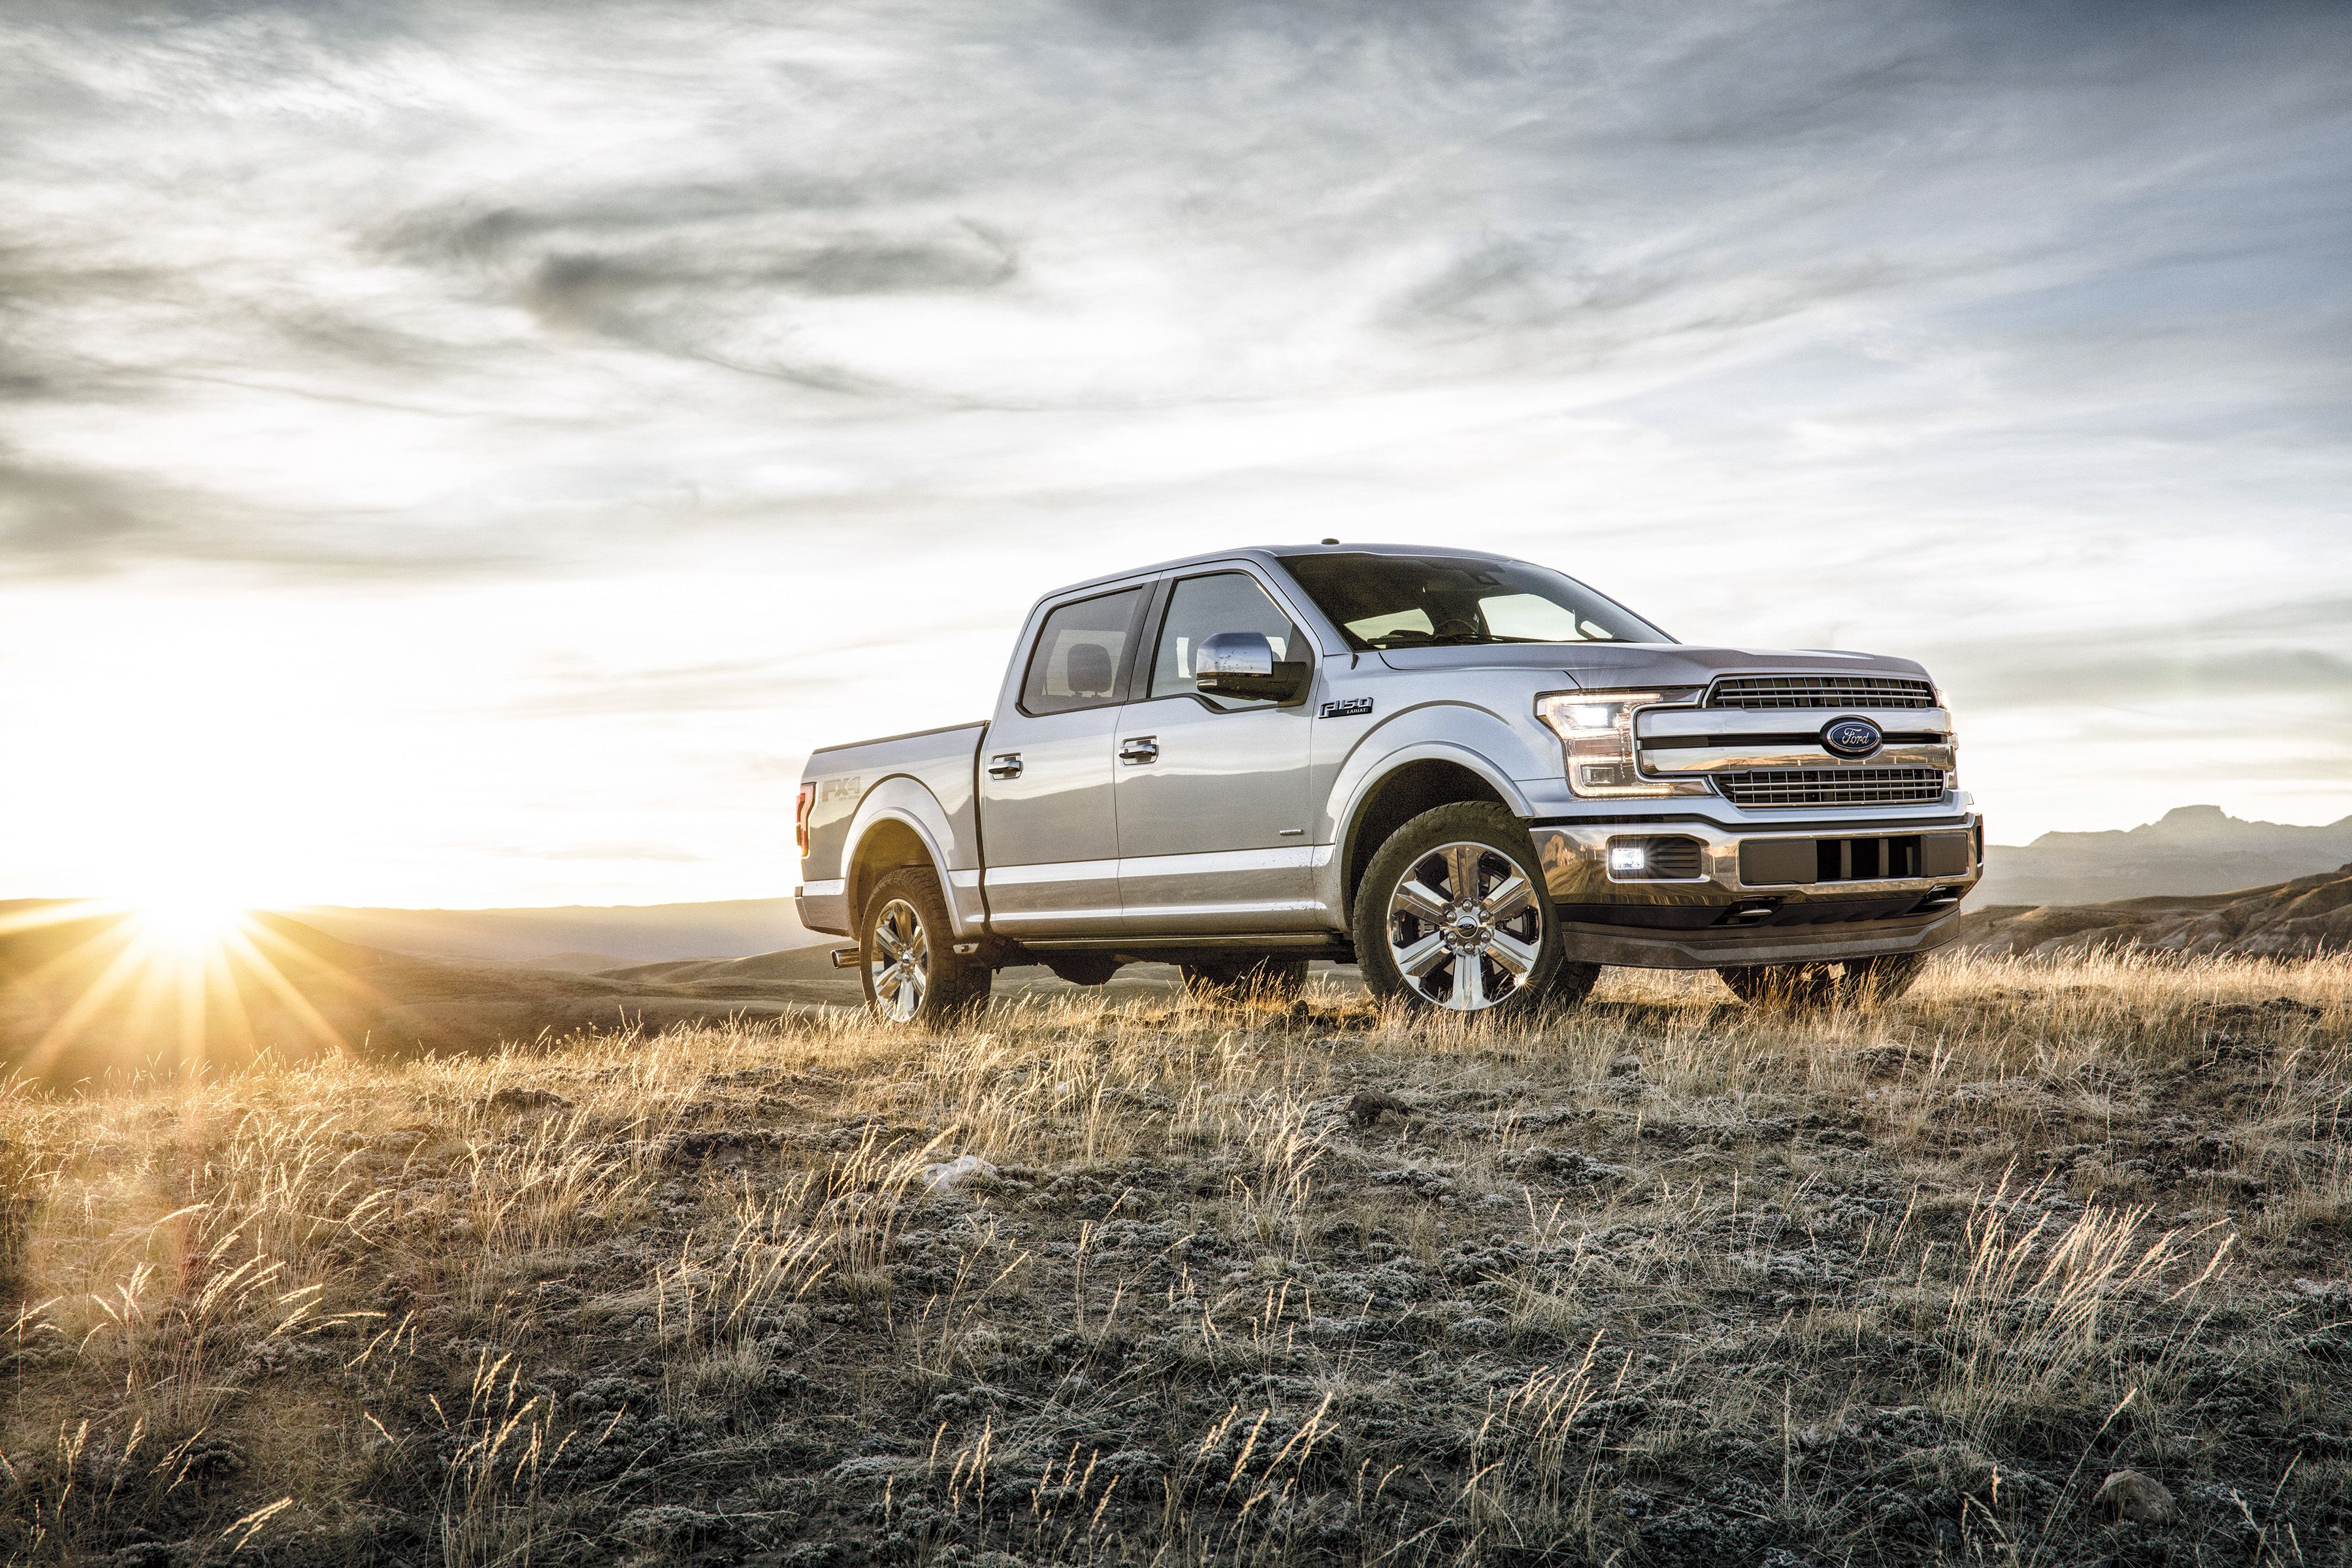 The 2018 Ford F-150 parked off-road.